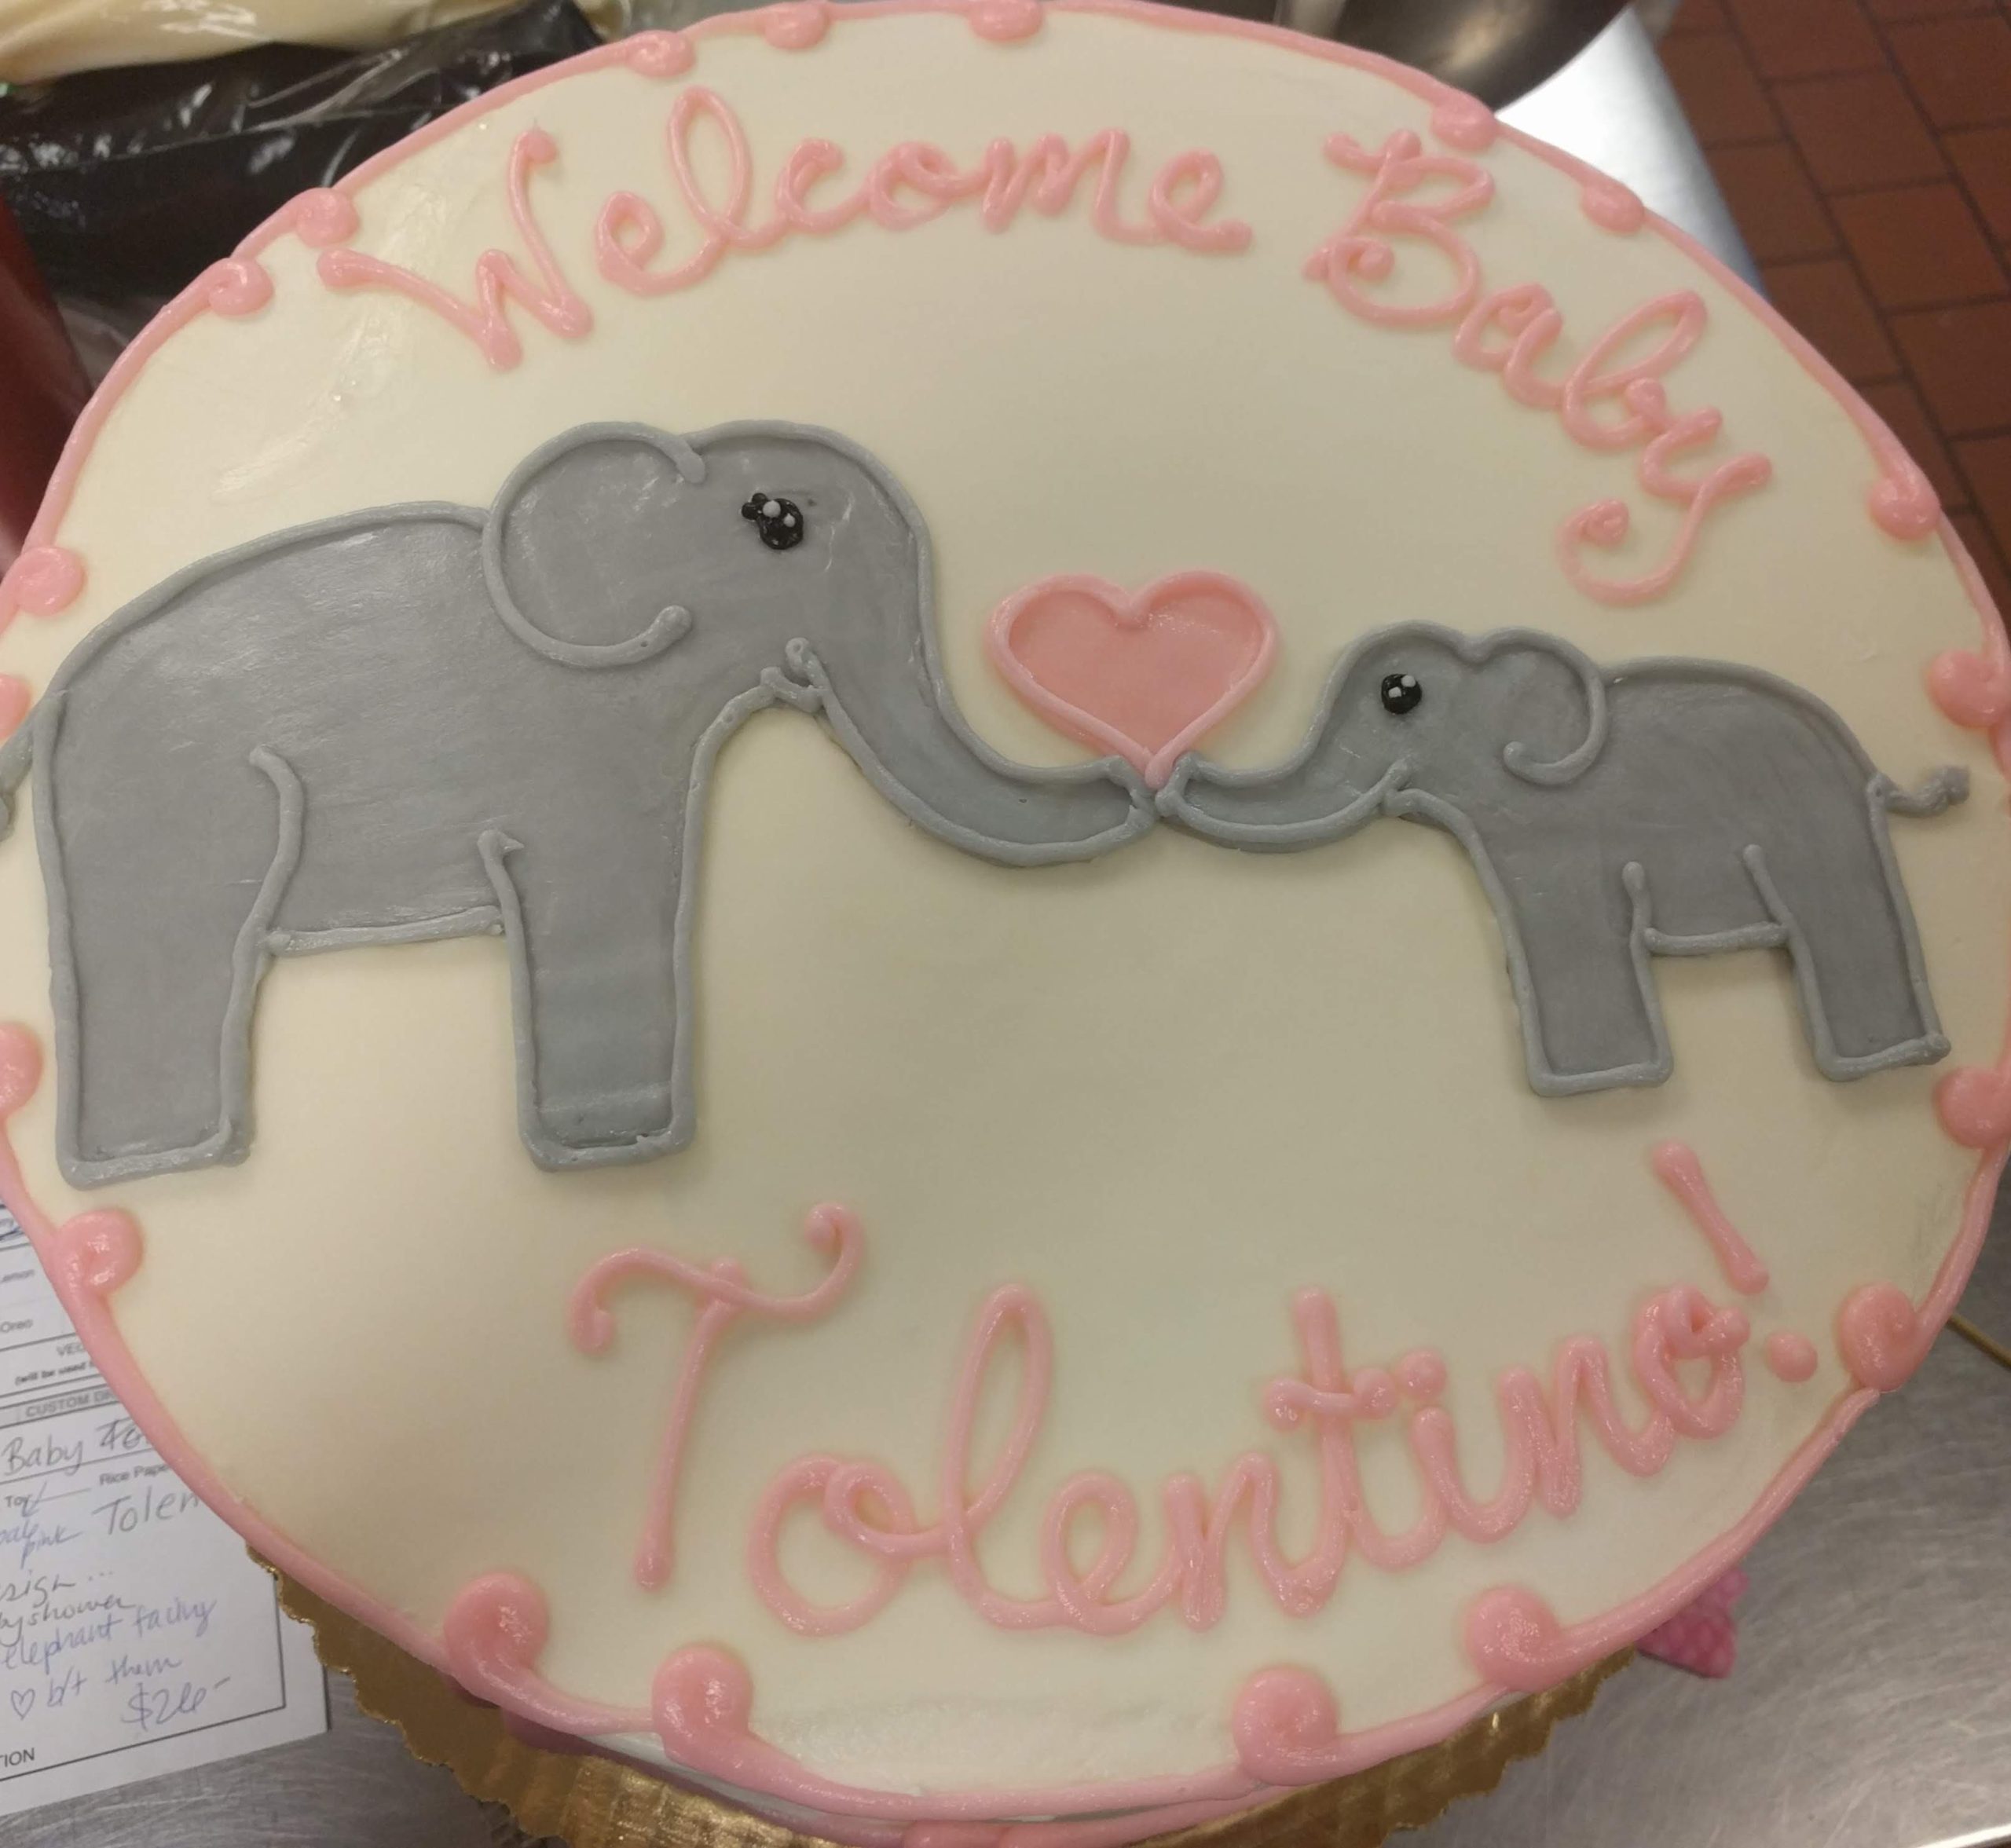 MOM AND BABY ELEPHANT HOLDING TRUNKS LOVE HEART CUTE FOR BABY SHOWER CAKE IN CHICAGO ILLINOIS